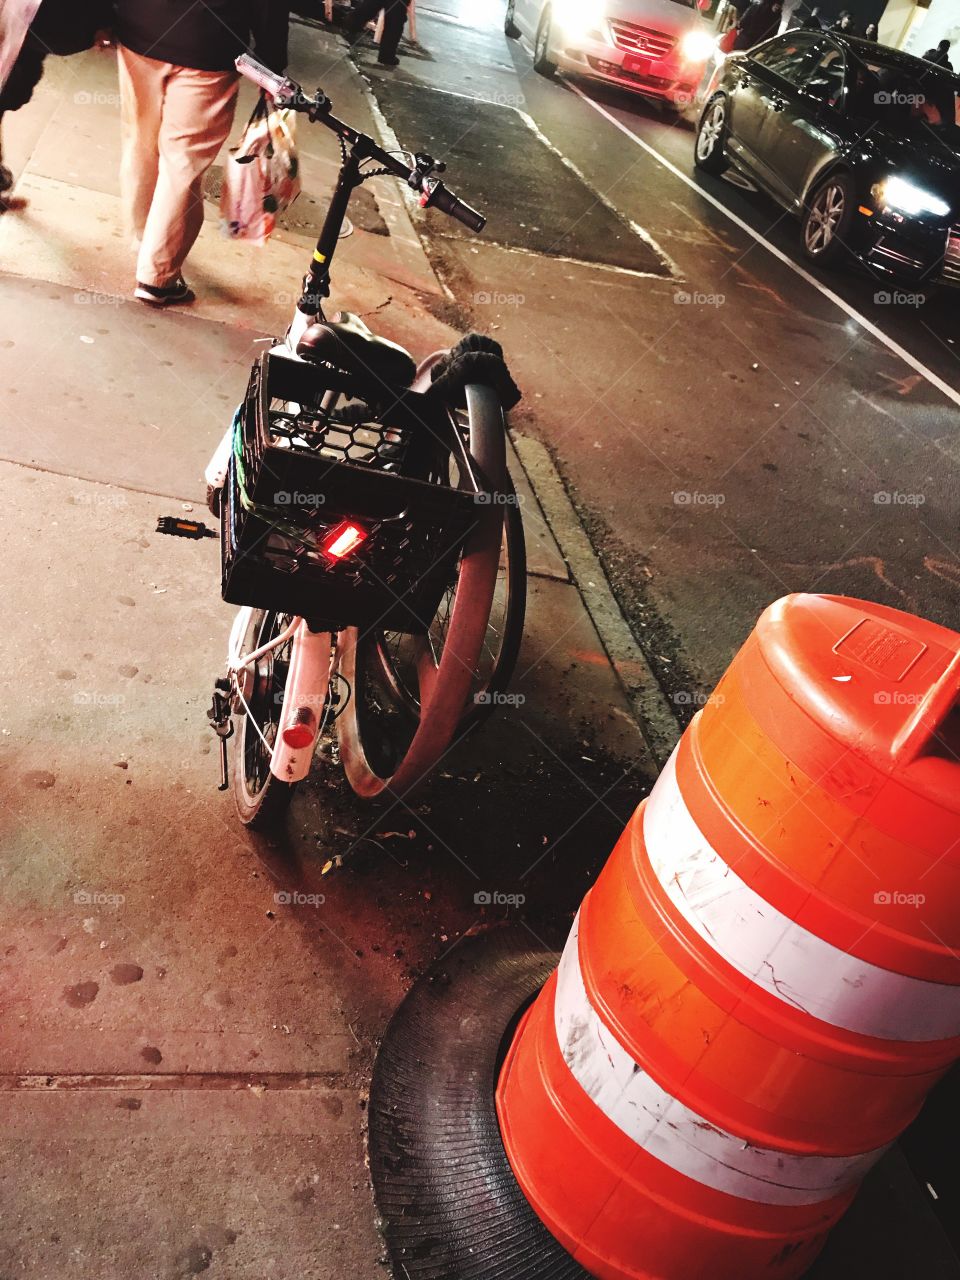 Scooter on West 39th street